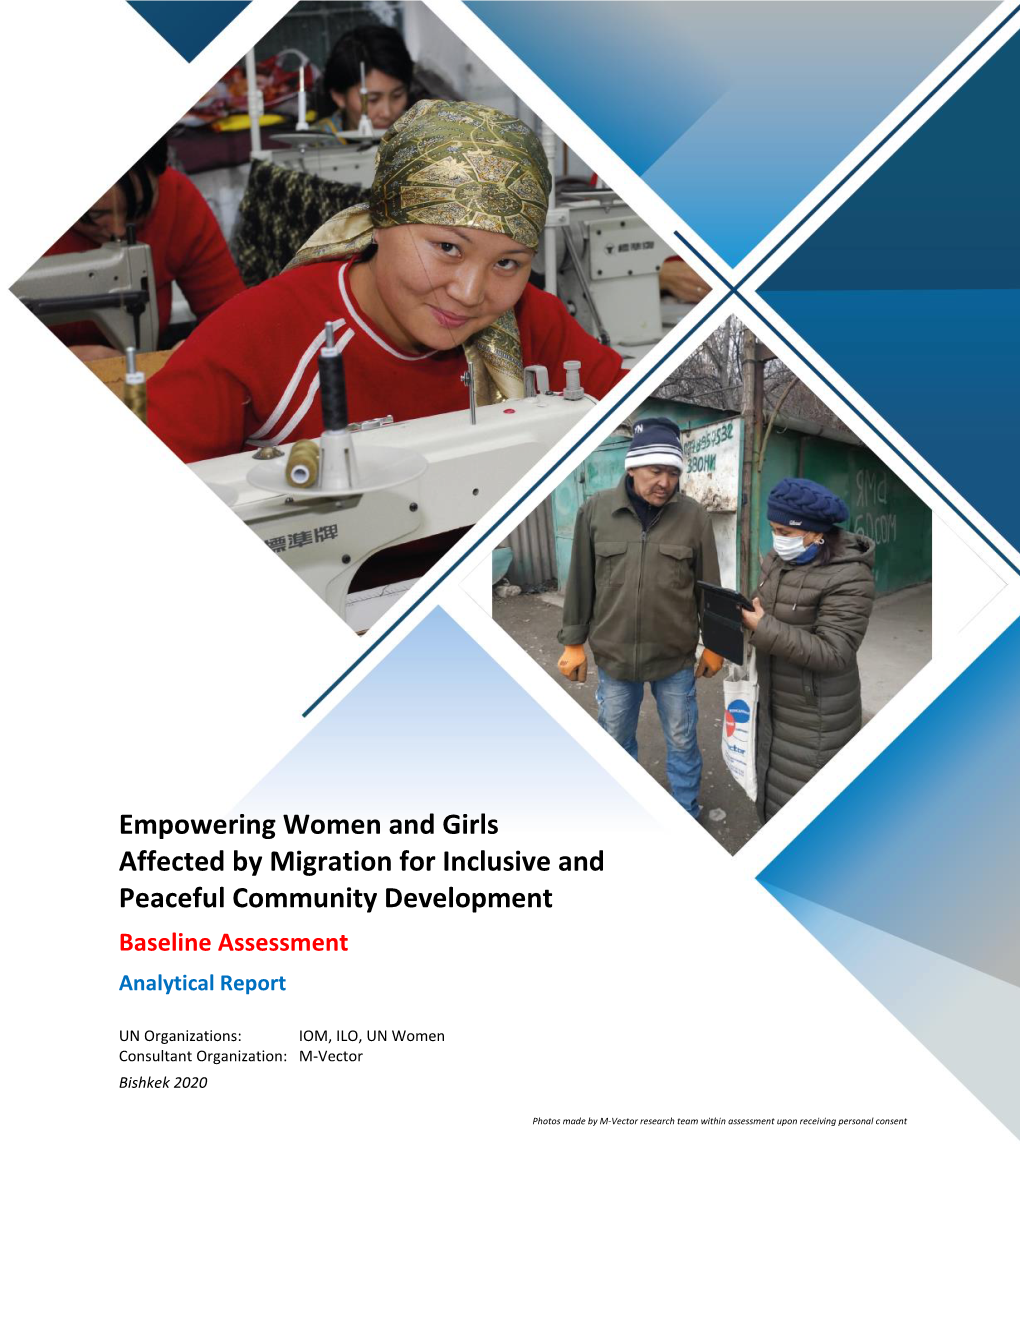 Empowering Women and Girls Affected by Migration for Inclusive and Peaceful Community Development